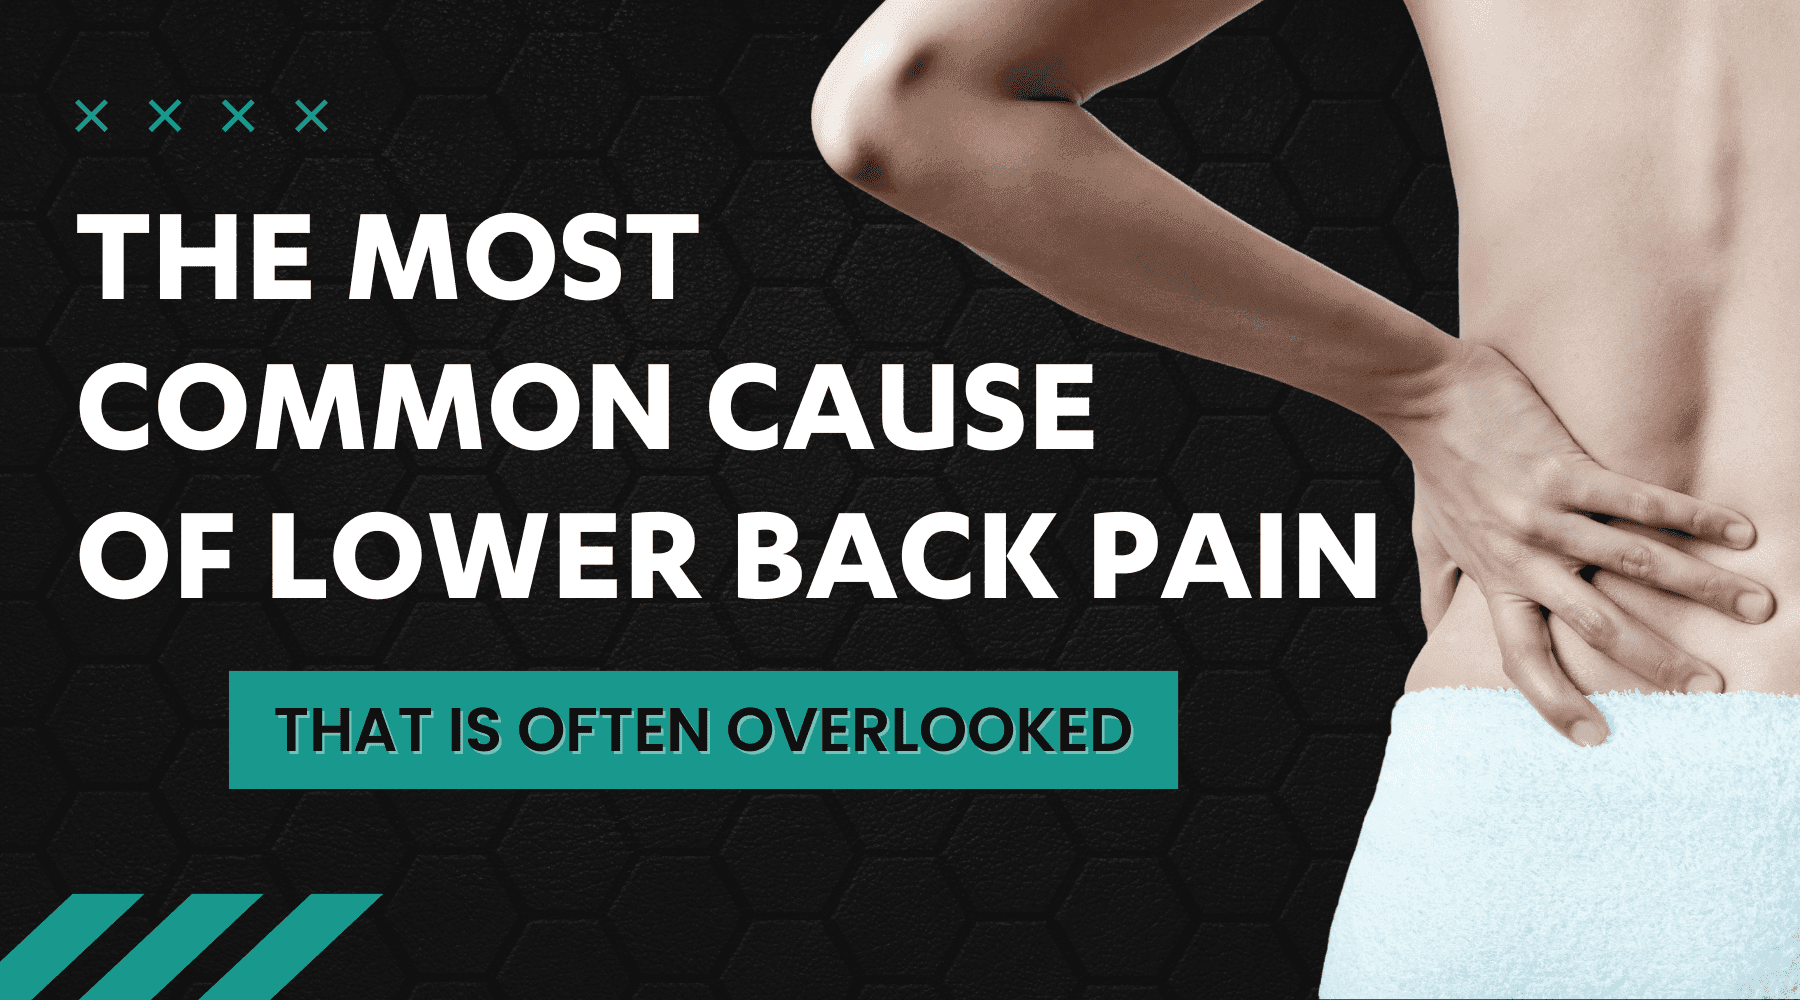 The most common cause of lower back pain, that is often overlooked 👀 - Dr Kez Chirolab 